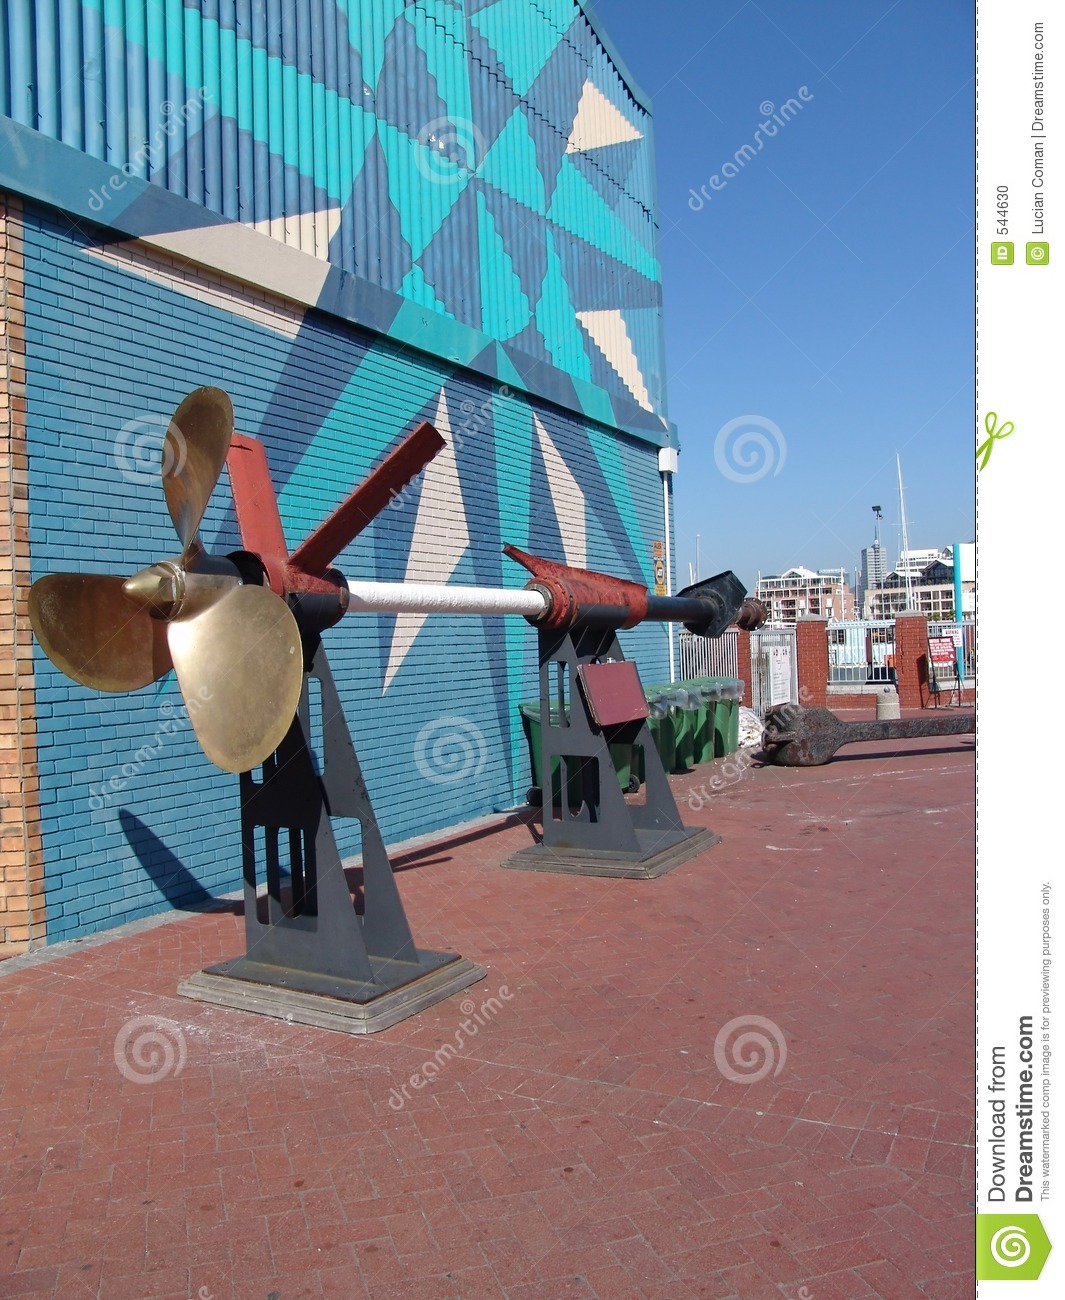 Ship S Propeller And Long Shaft On Static Display Beside A Colorful